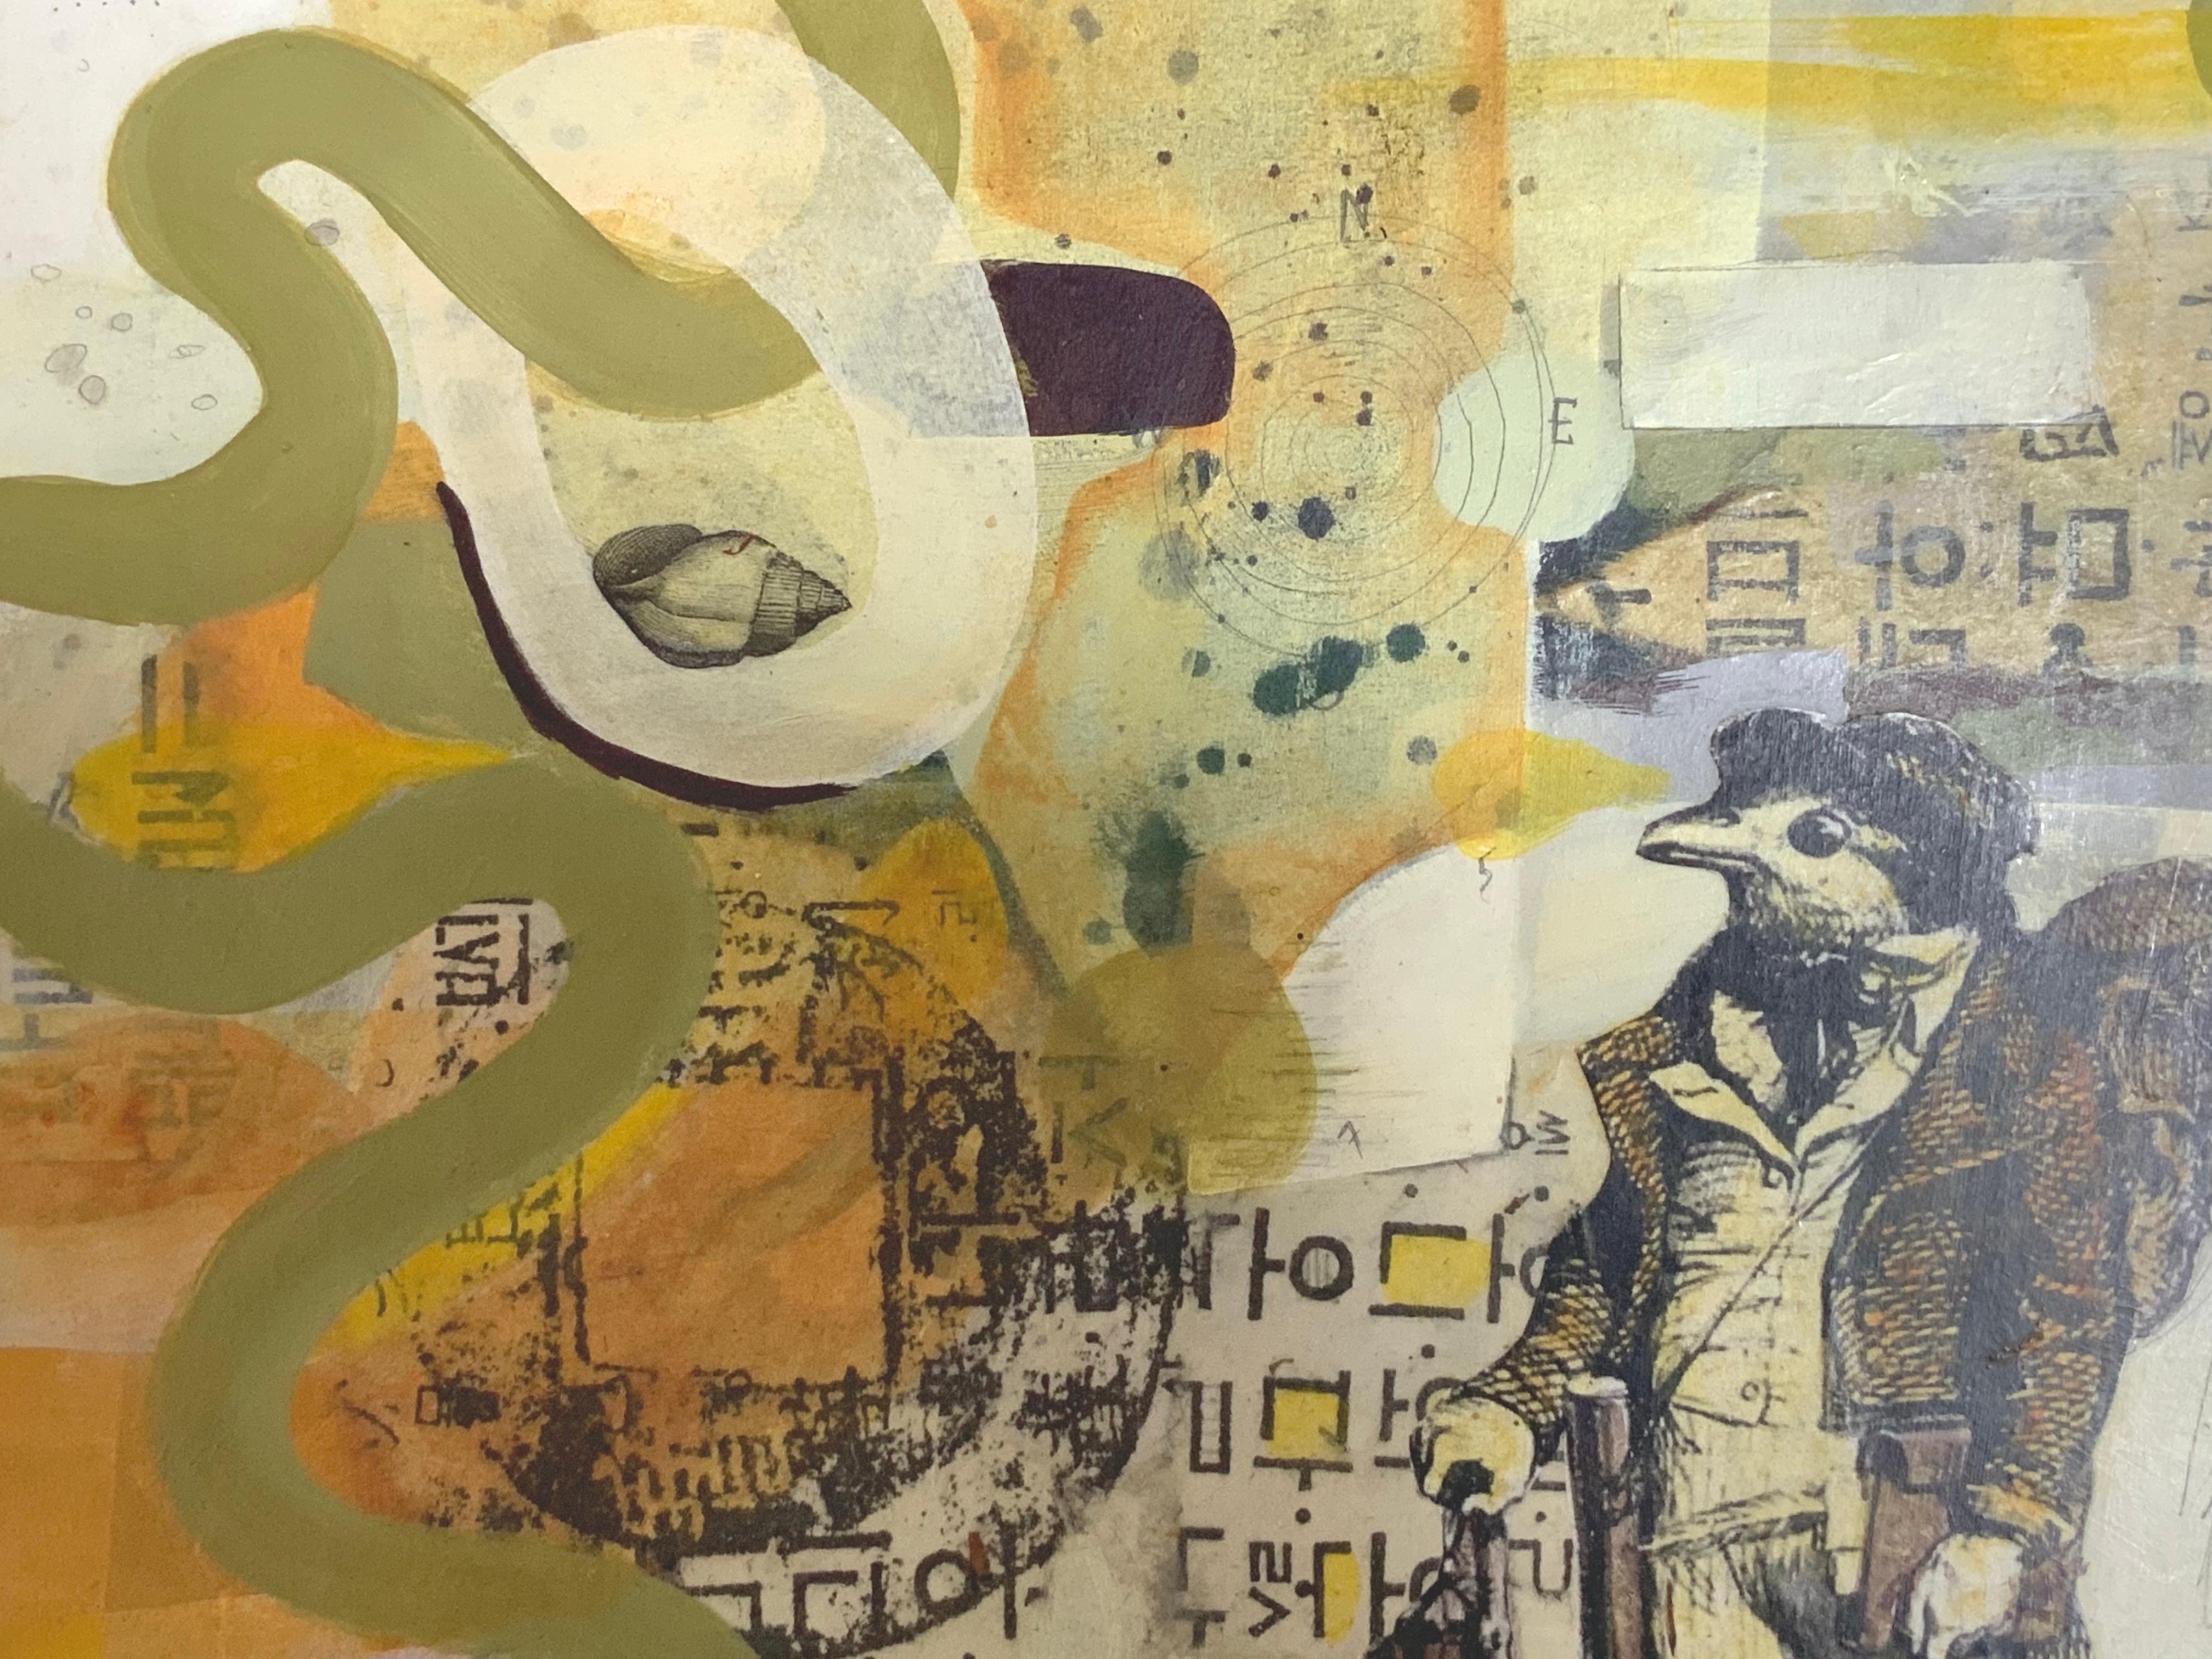 <p>Artist Comments<br>Artist Steph Gimson exhibits a peregrine in a top and a suit. She paints an abstract scene filled with curved linework and playful shapes. Part of her Whimsical collection where she explores fantasy and surrealist themes. Steph